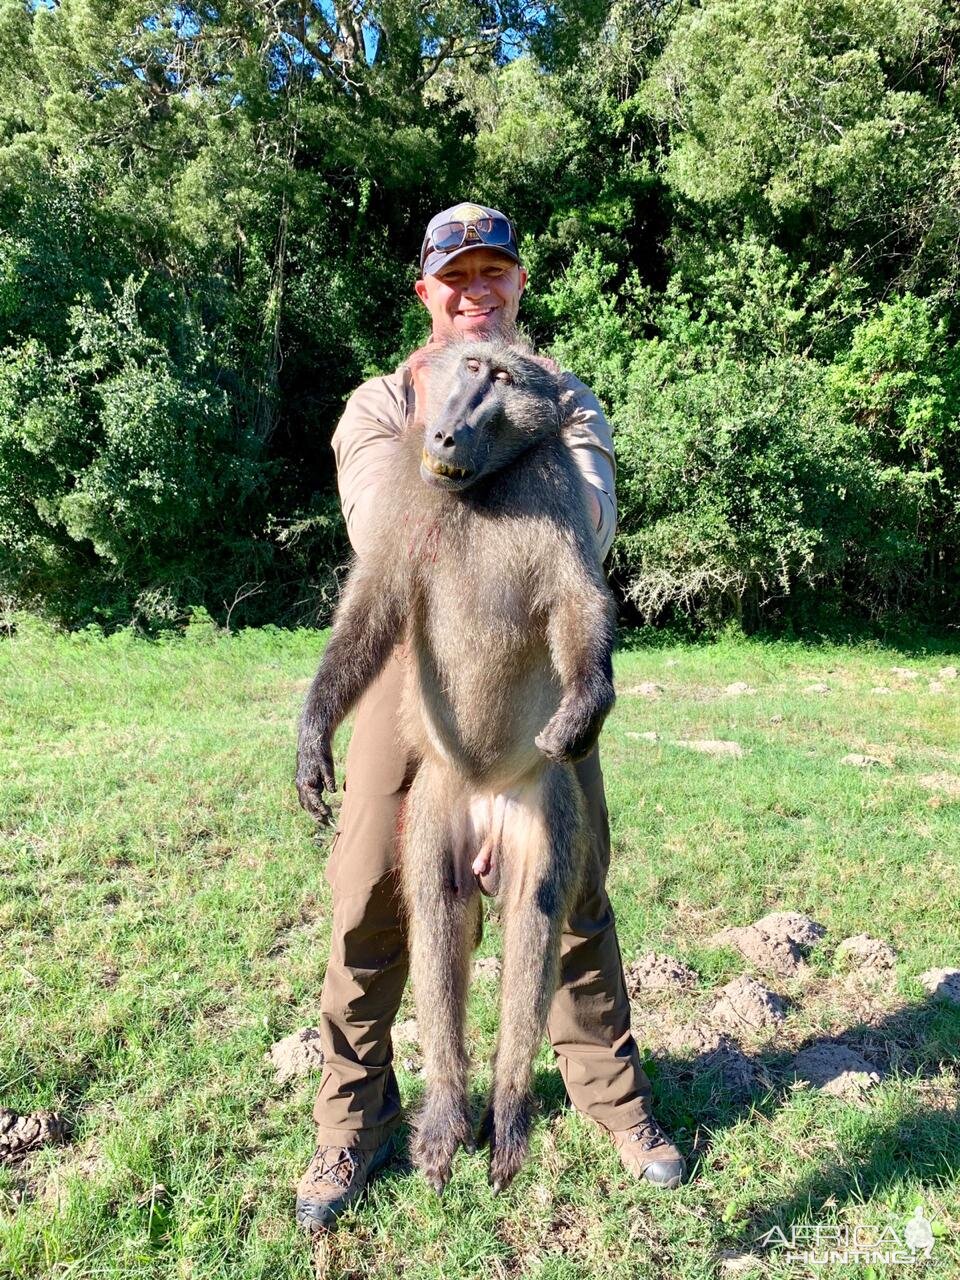 Hunting Baboon in South Africa